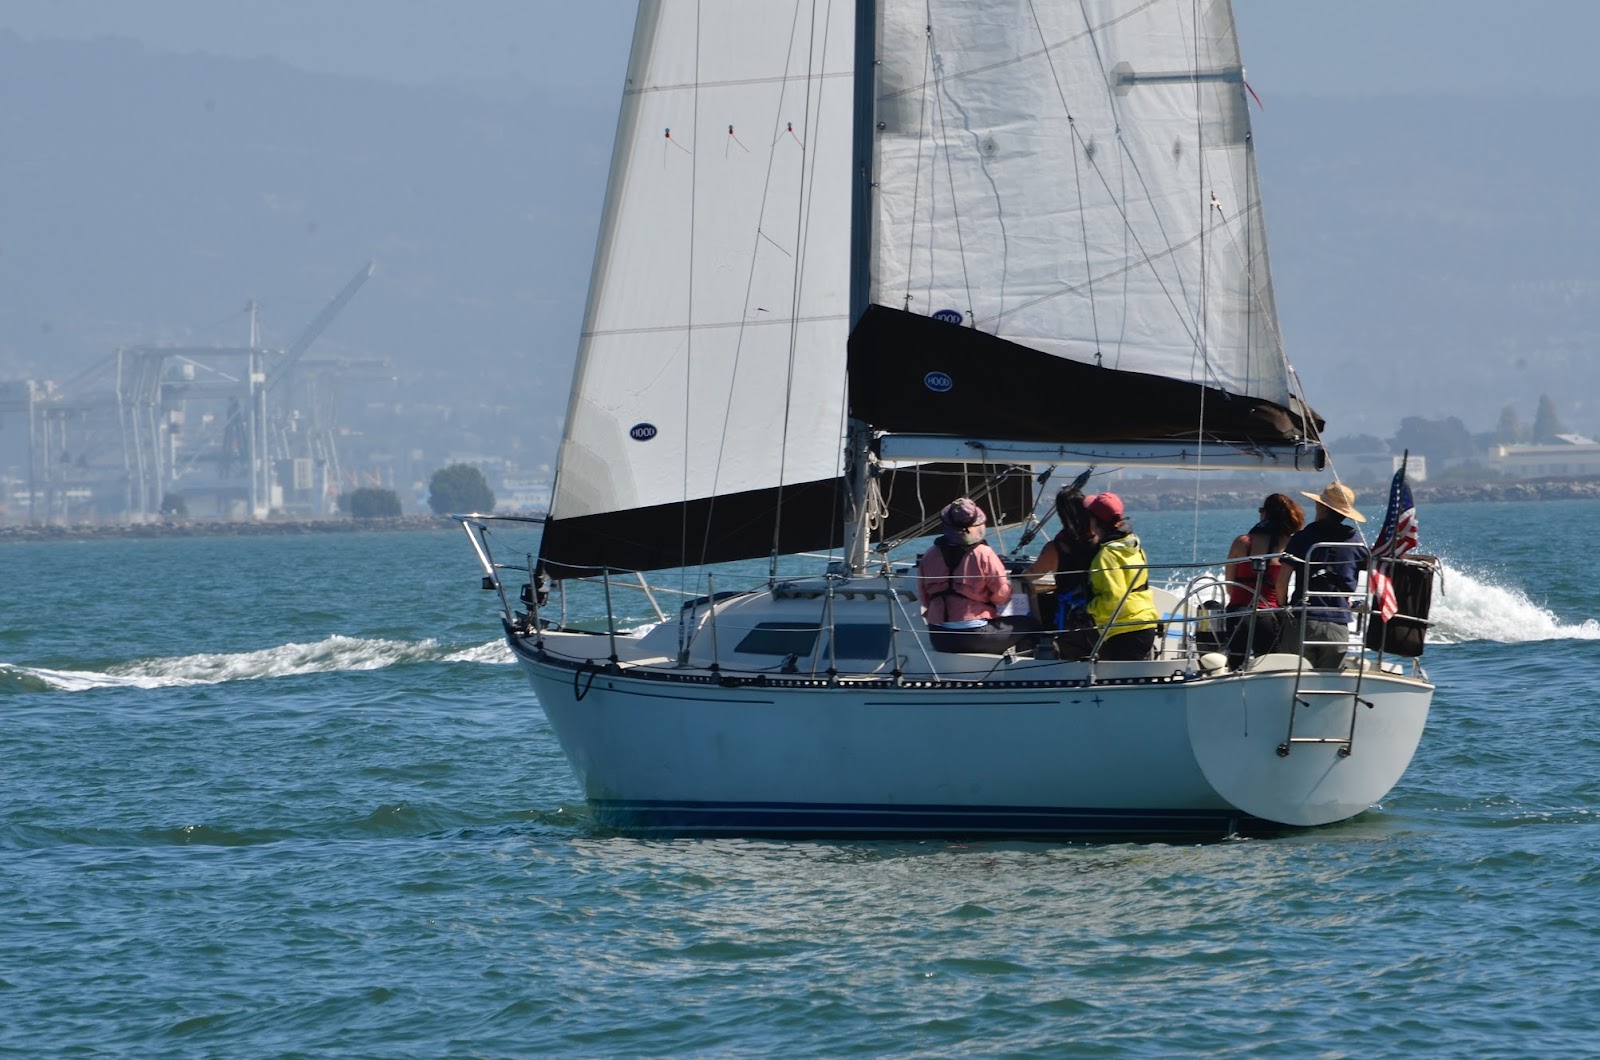 Work hard to network whilst you are sailing. RYA sailing courses are a great place to do this.